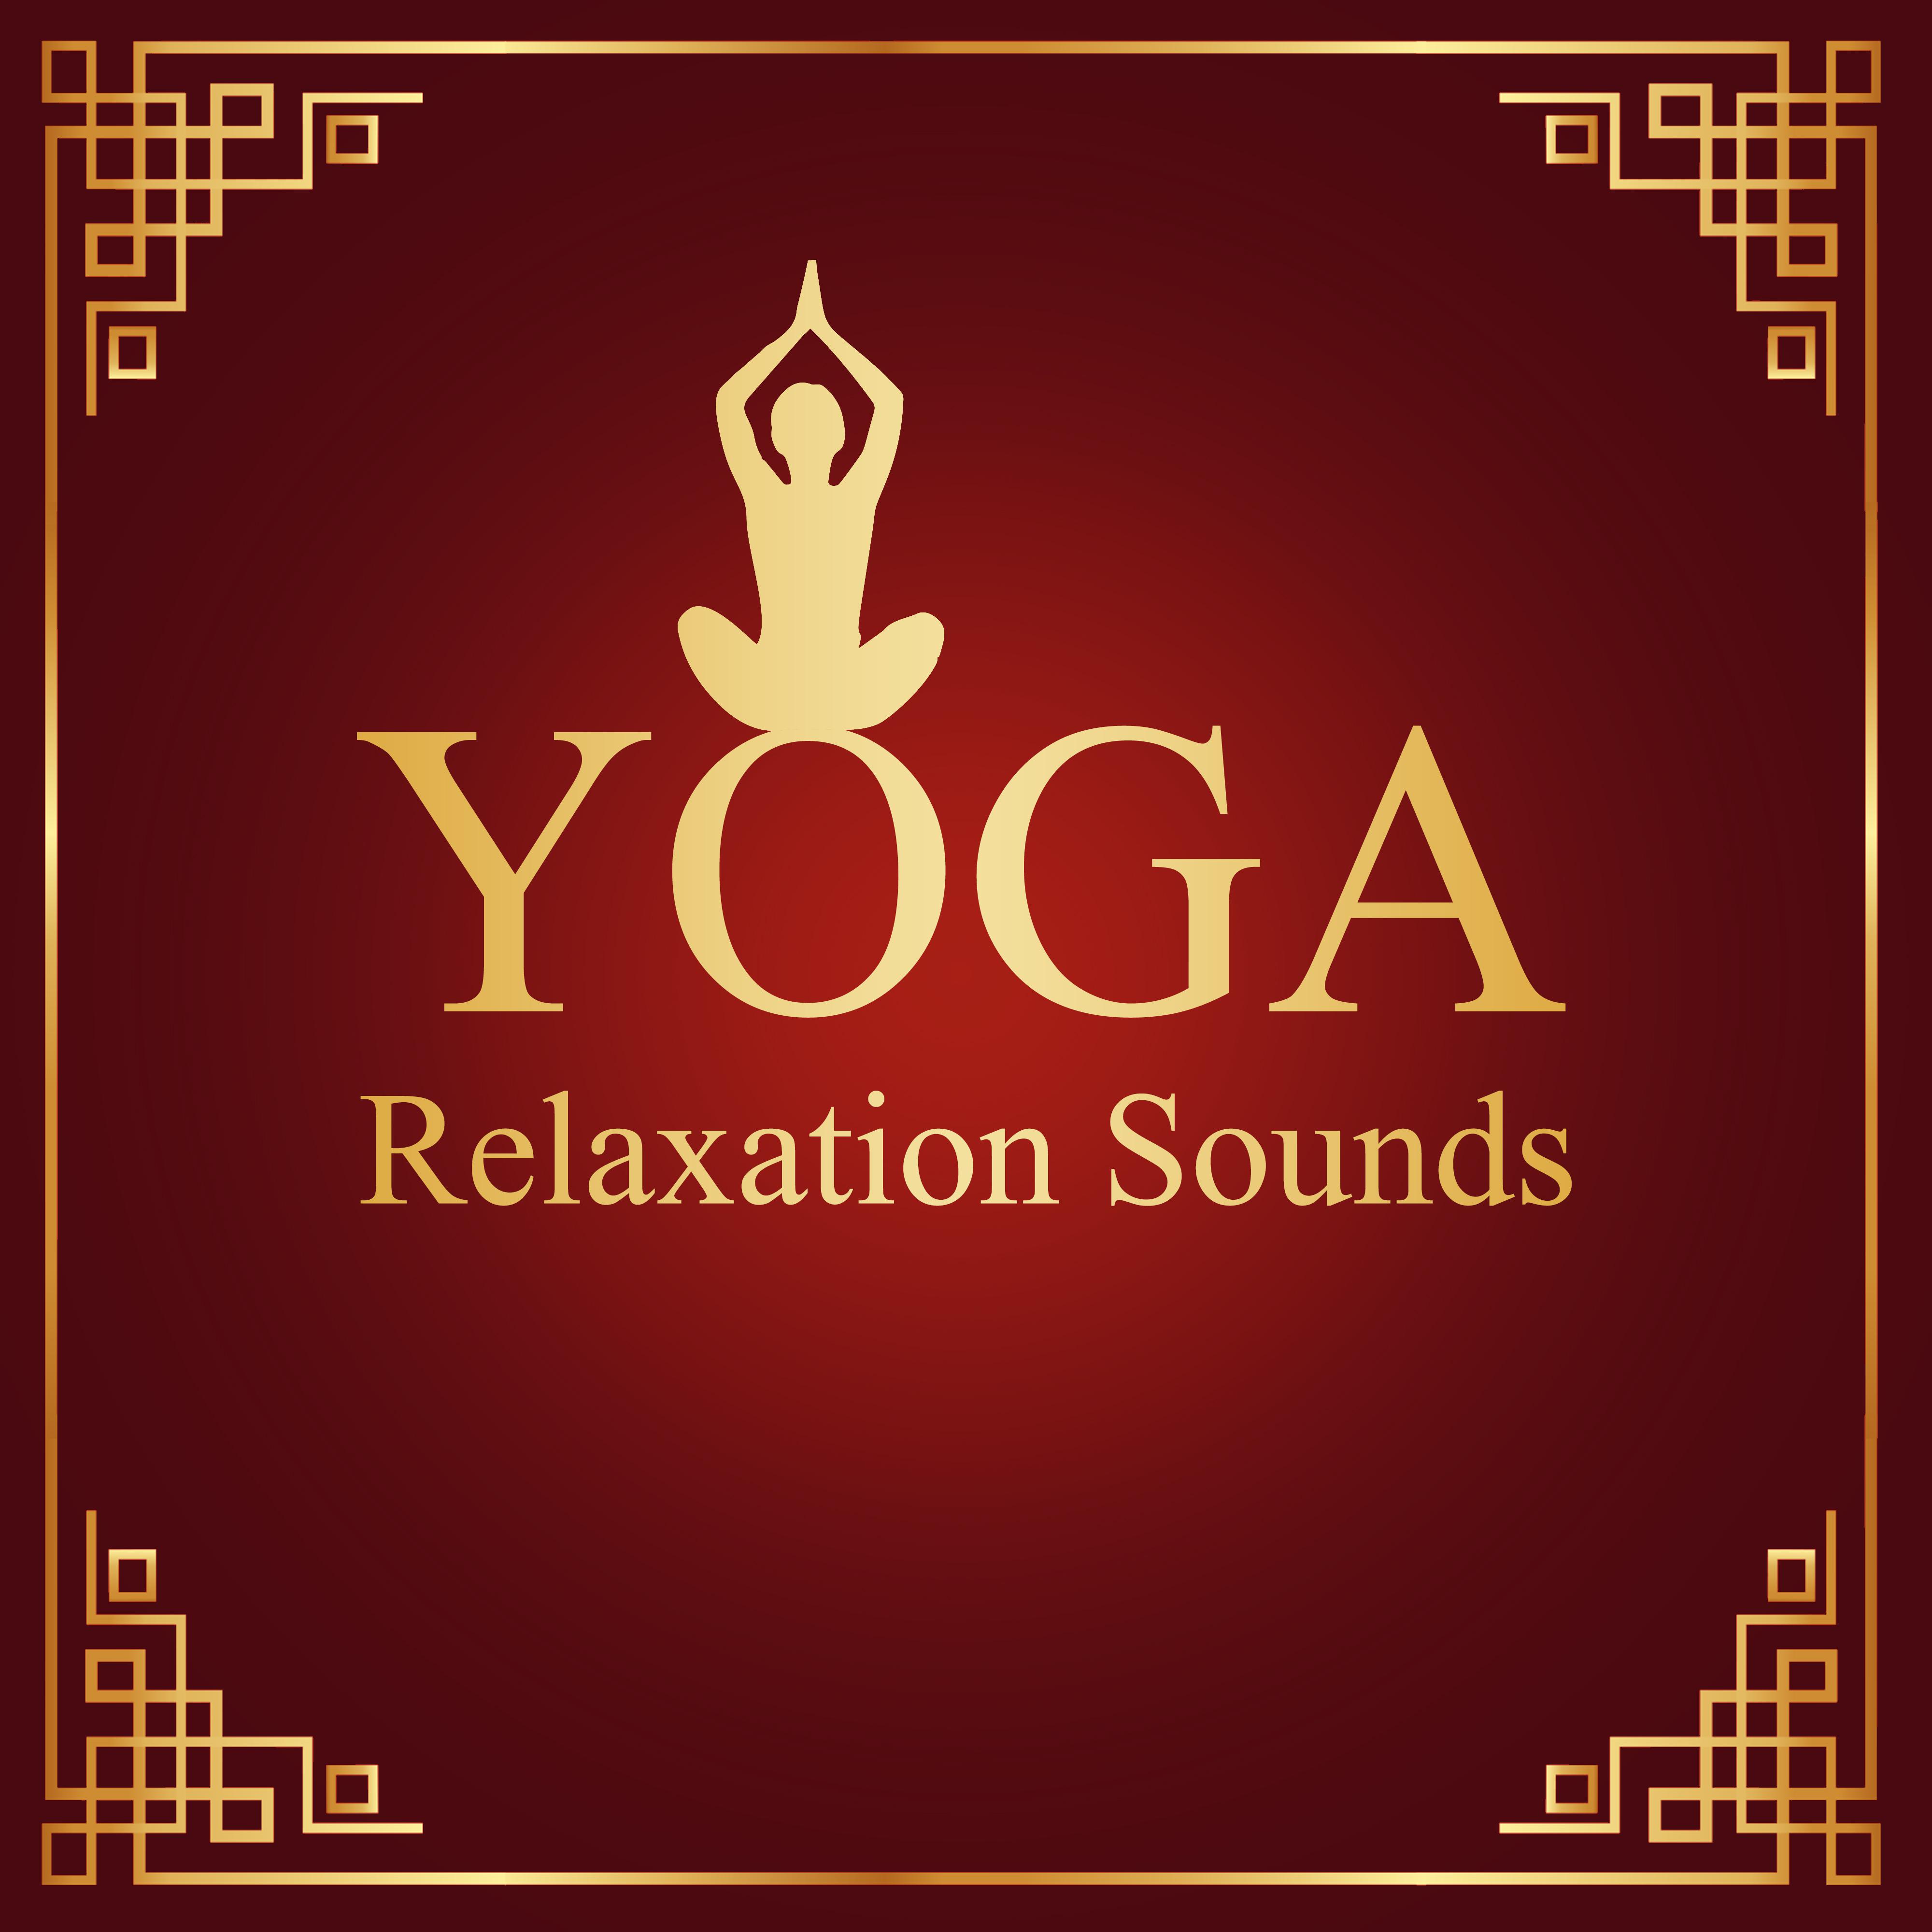 Yoga Relaxation Sounds  Meditation Music to Calm Mind  Body, Training Time, Soft New Age Music, Stress Free